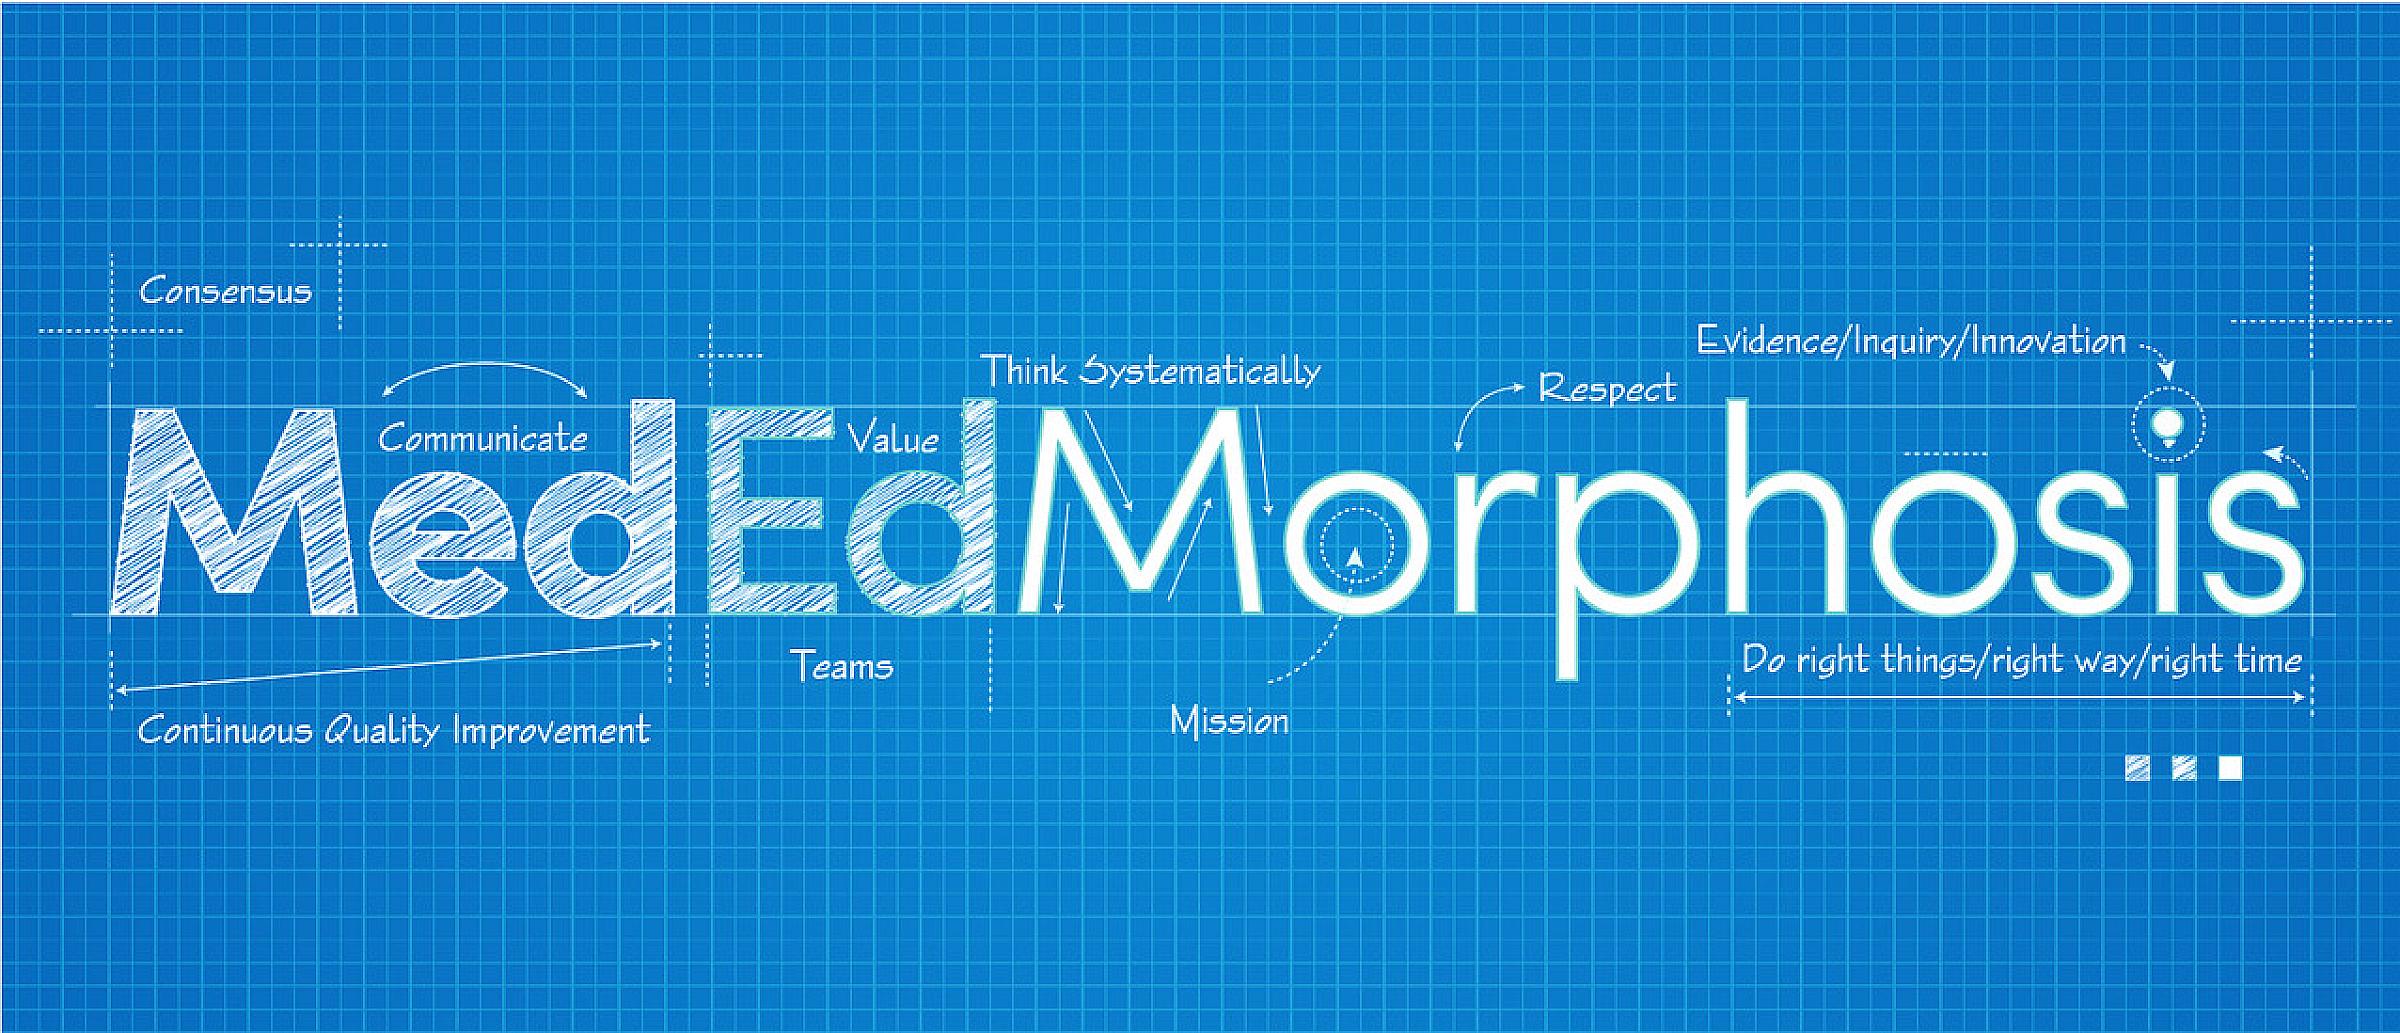 MedEdMorphosis custom blue banner- Consensus. Communicate. Value. Teams. Think Systematically. Respect. Evidence/Inquiry/Innovation. Continuous Quality Improvement. Mission. Do right things/ right way/ right time.